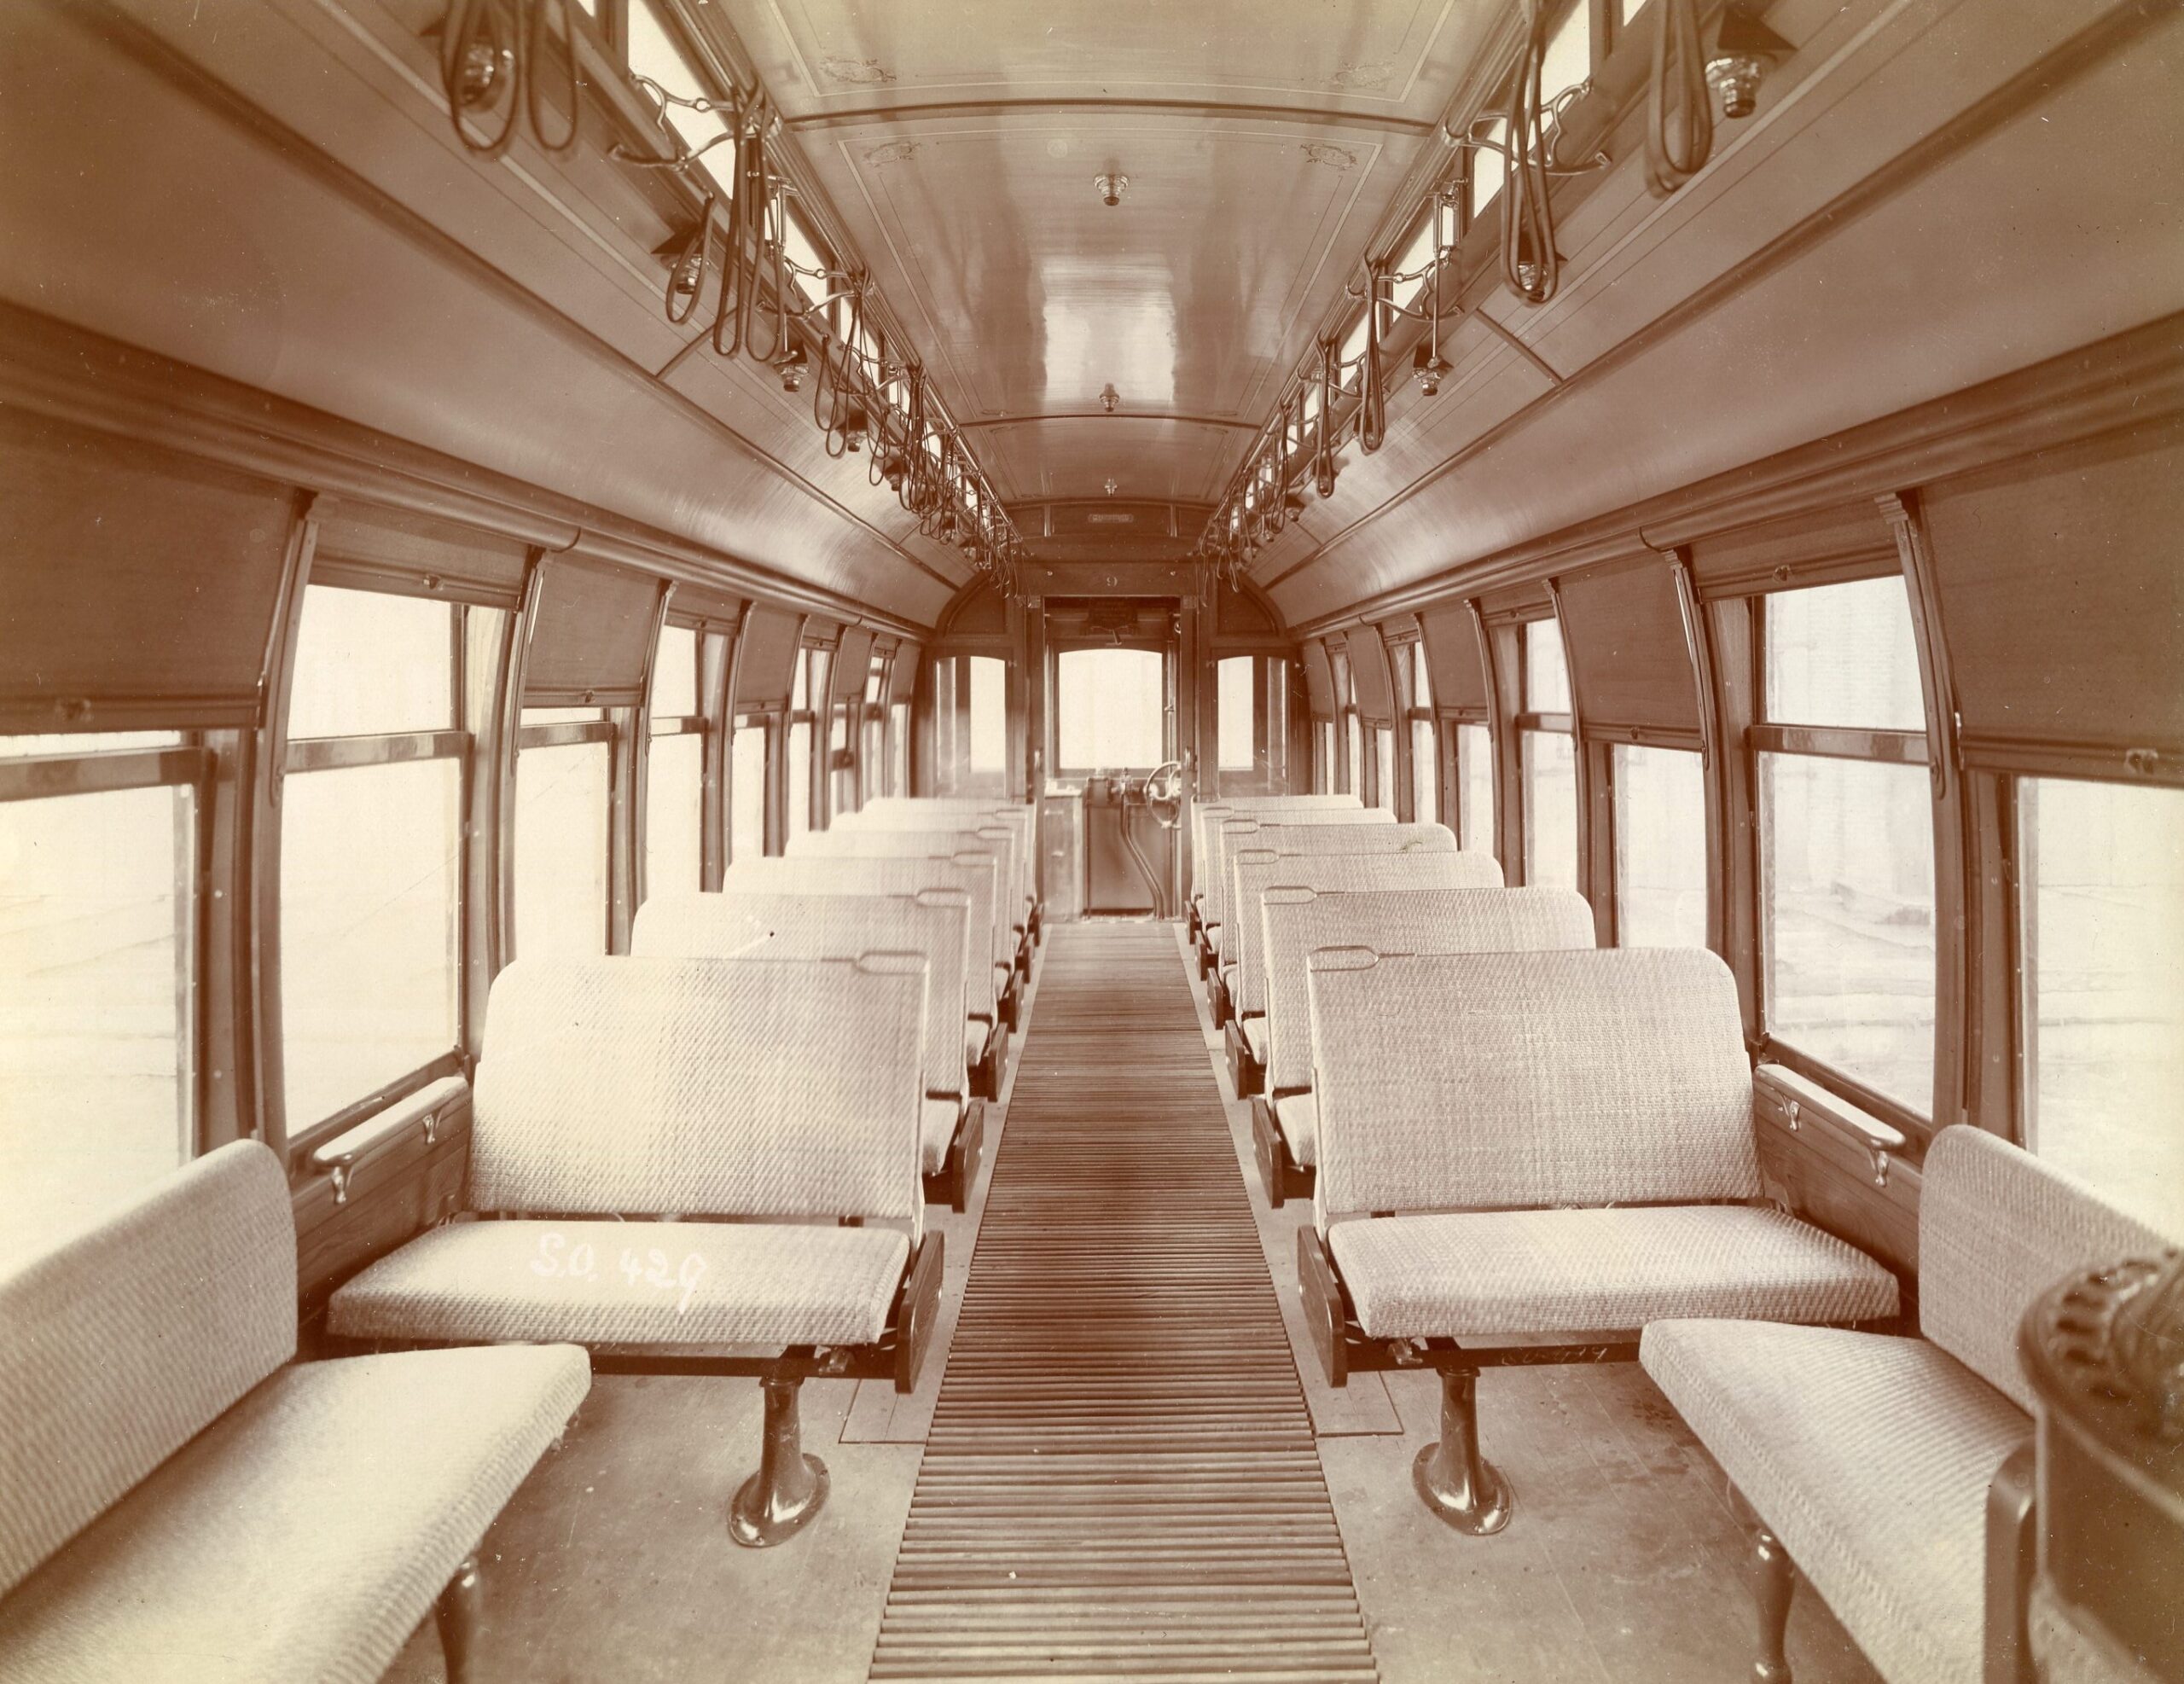 The Irwin Herminie Traction Company | Cleveland, Ohio | Kuhlman car 9 | Interior | 1910 | G.C. Kuhlman car company photograph | NJCNRHS collection